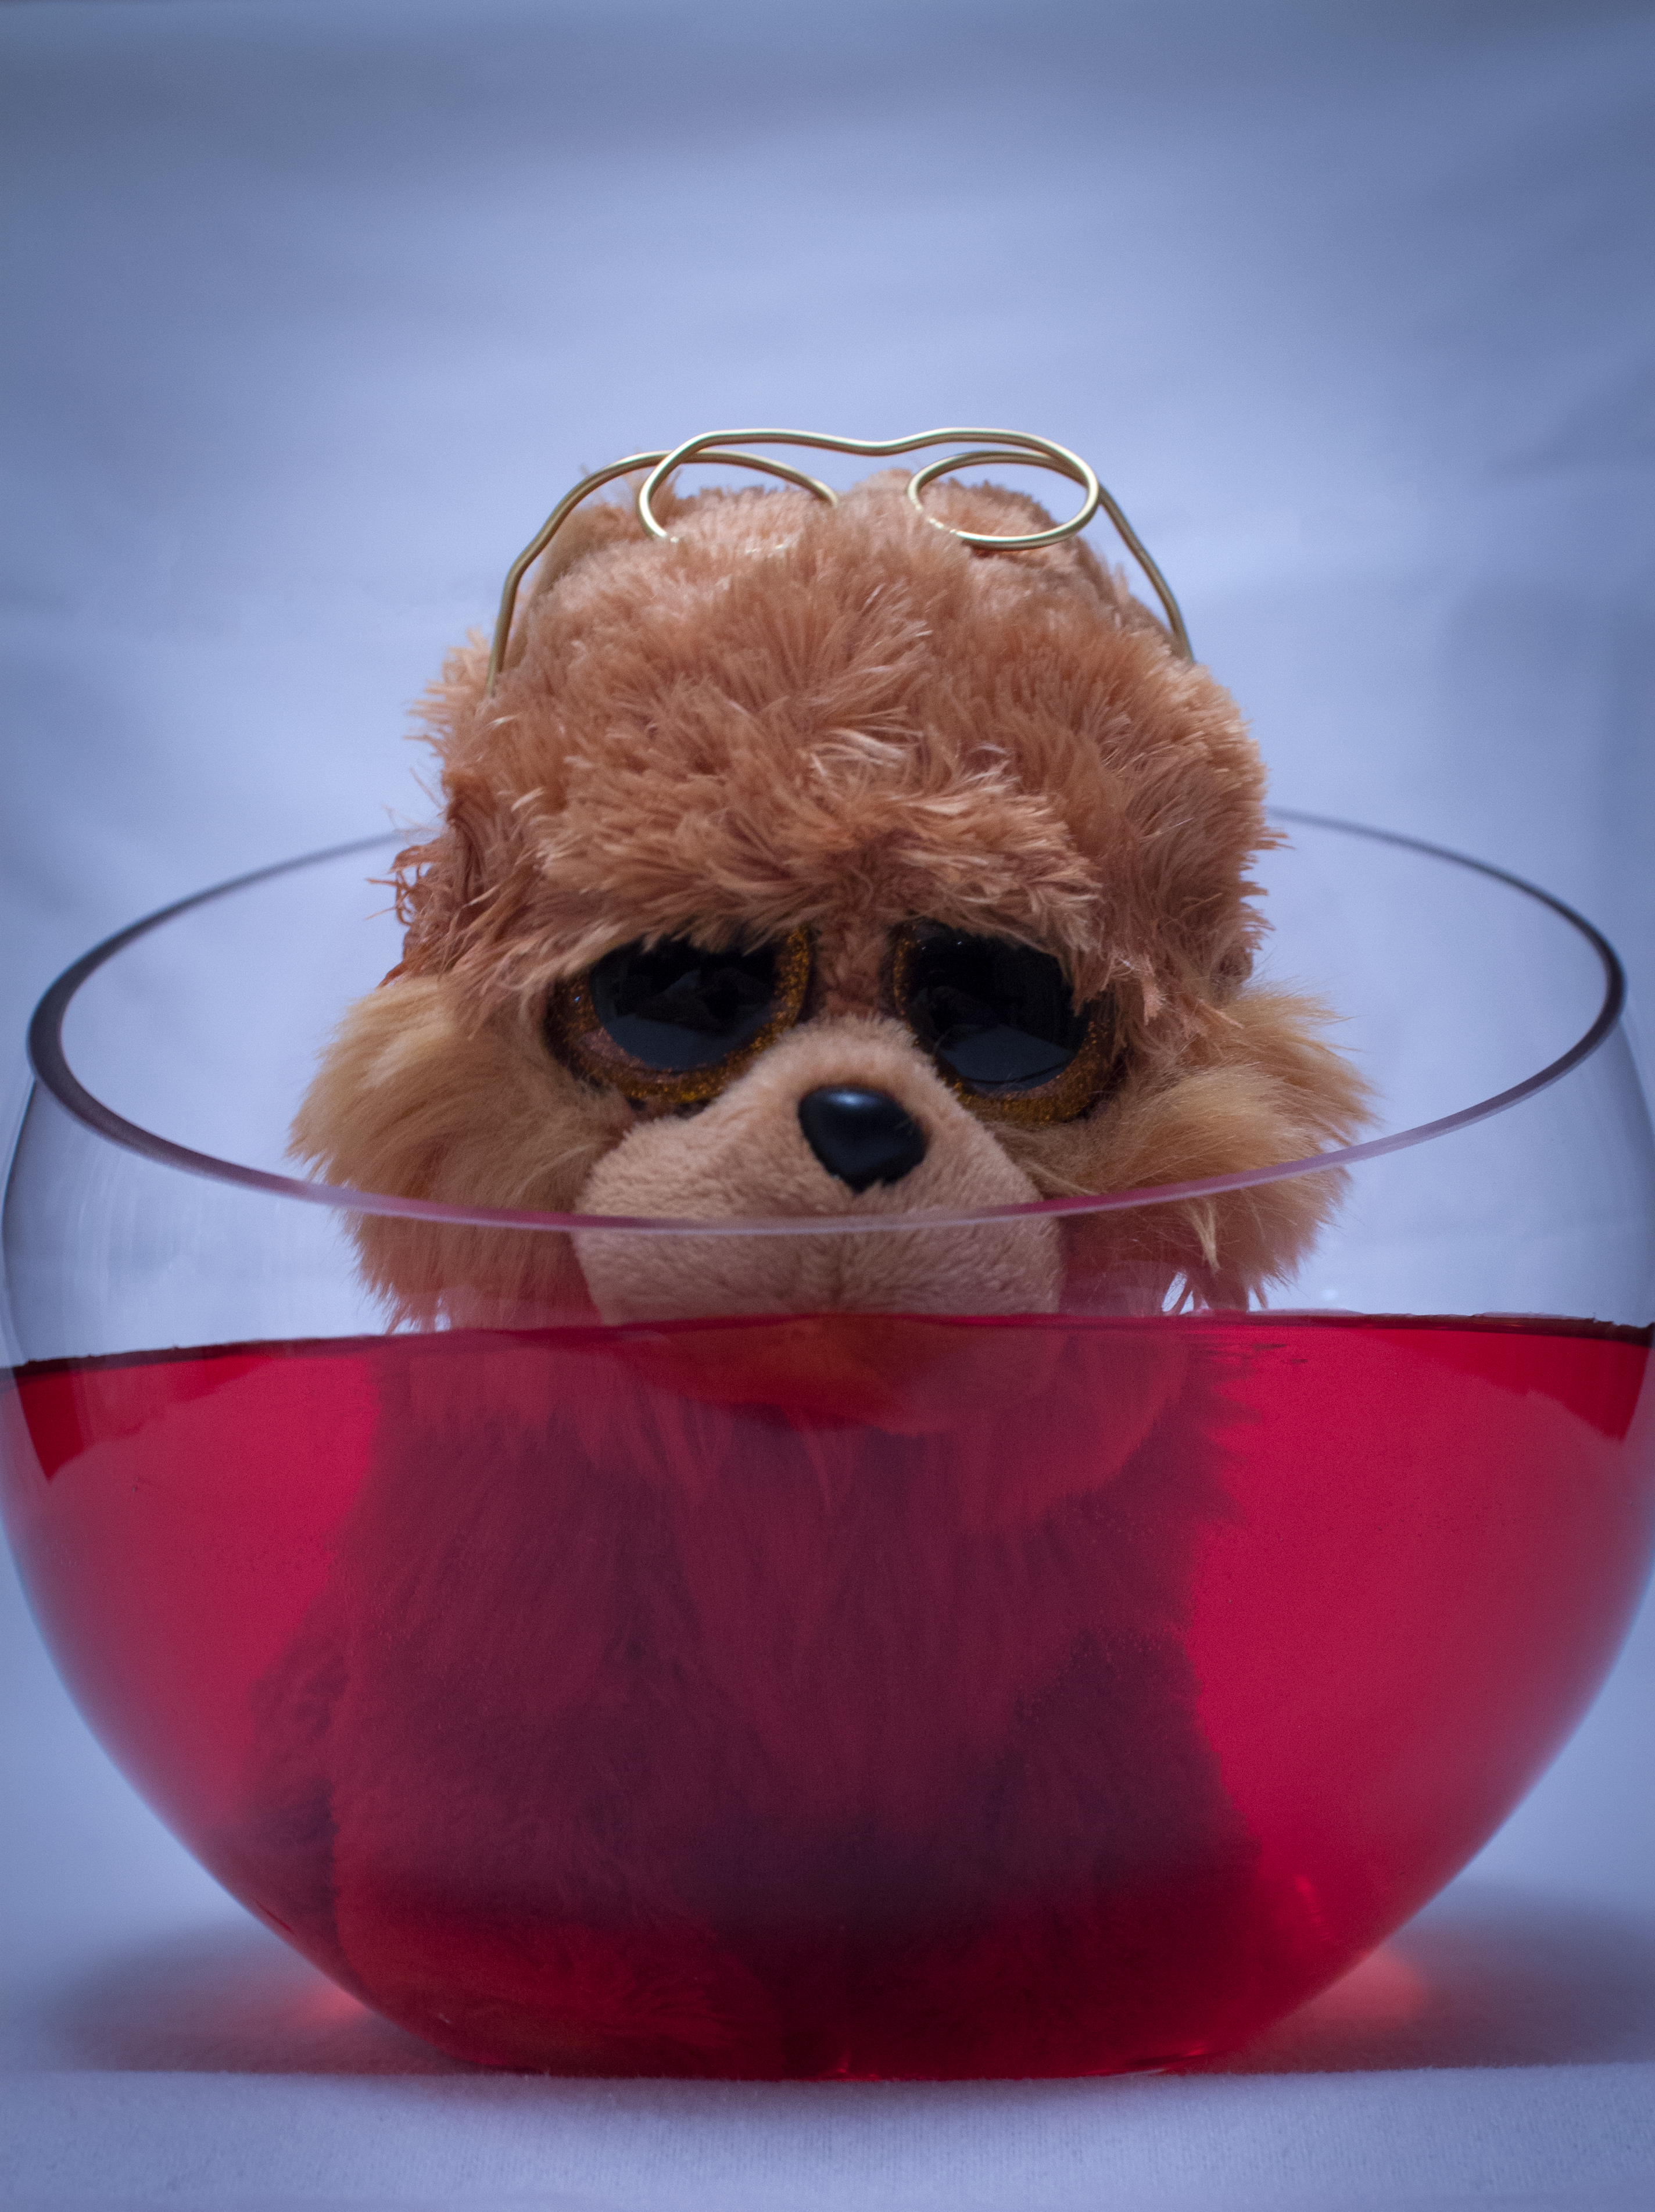 This is my Conceptual Art Production.  It is a photo of a toy puppy that is bathing in a bowl of red water.